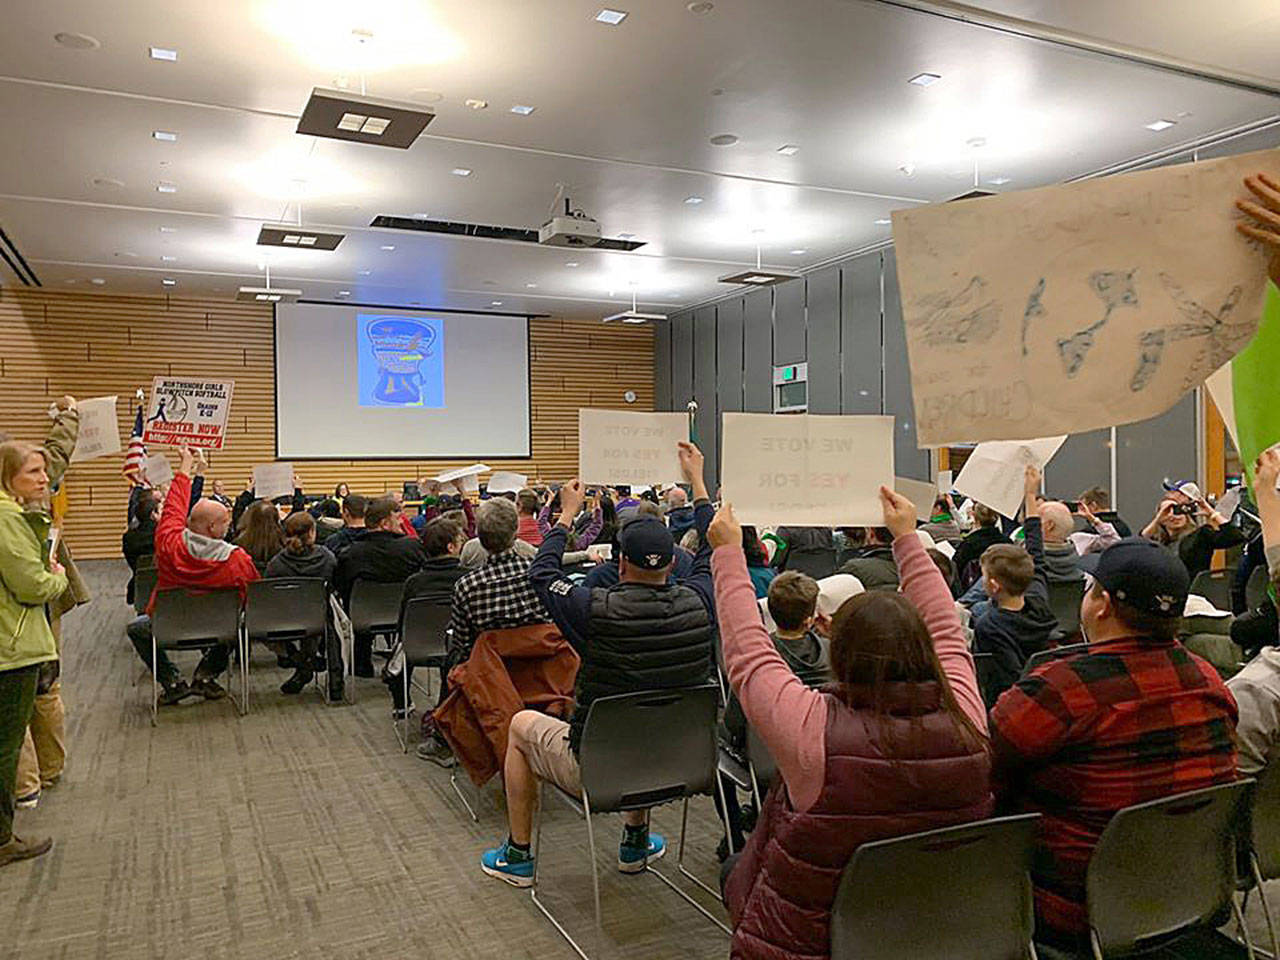 Scores of community members came to the Feb. 3 Kenmore City Council meeting to voice their concerns about the proposed St. Edward State Park athletic field project. Photo courtesy Camp Roots Facebook page